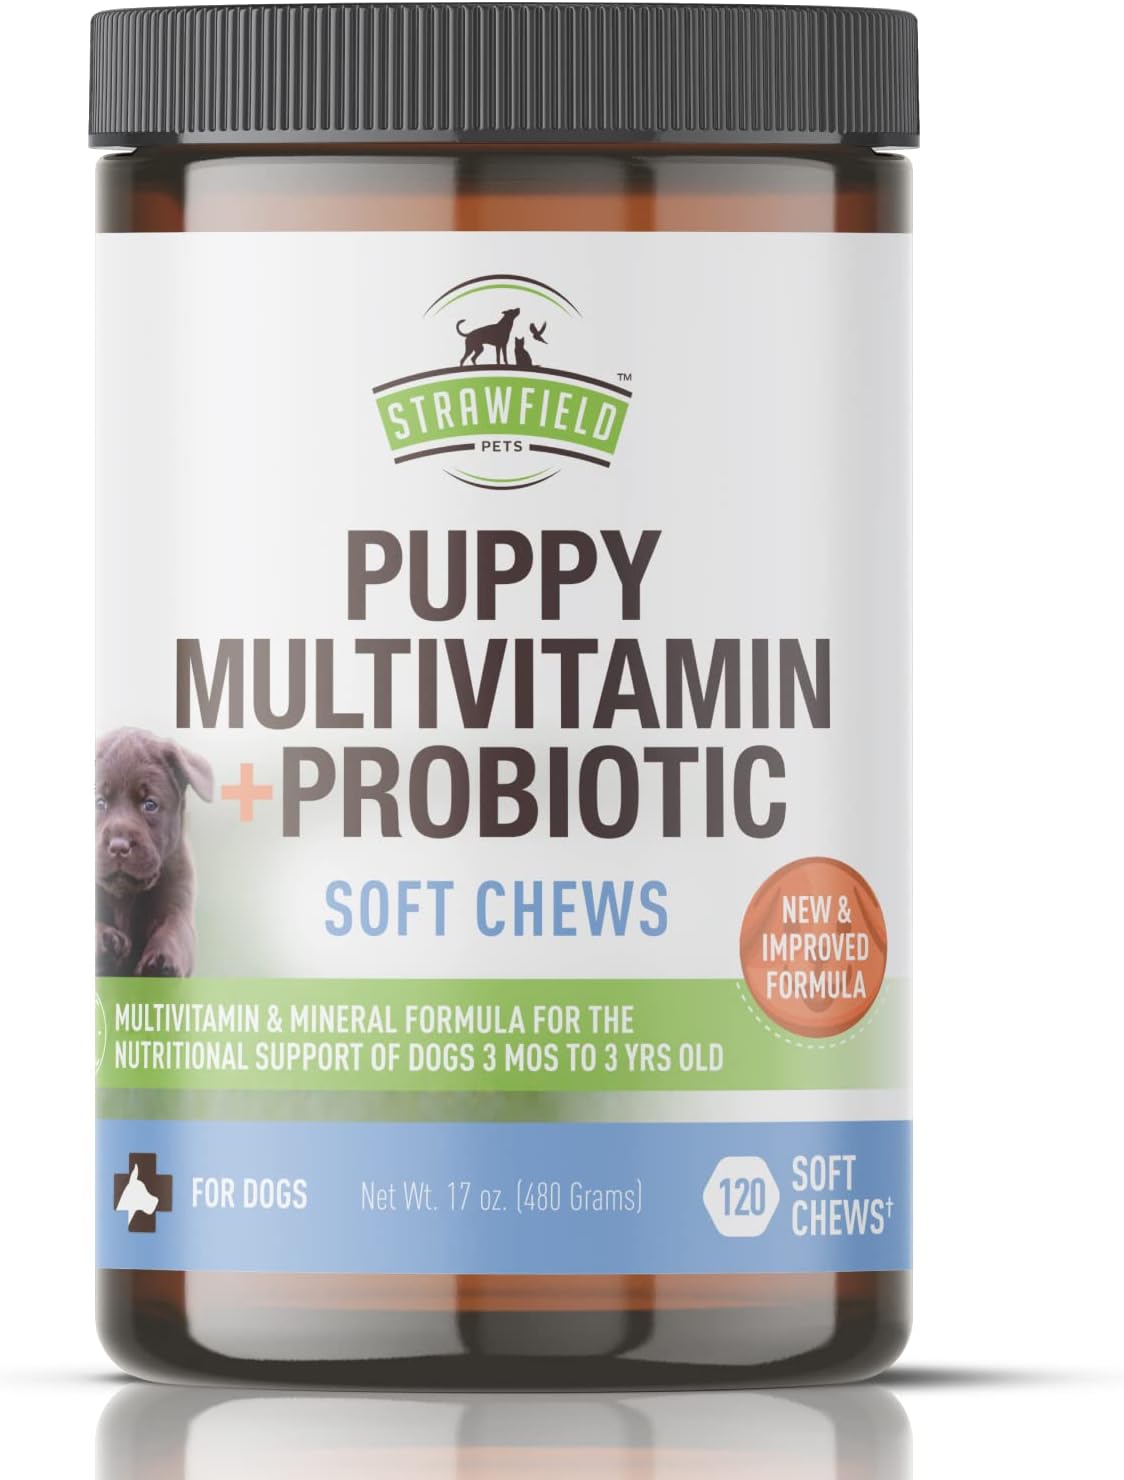 Strawfield Pets Puppy Multivitamin + Probiotics for Dogs Puppy Vitamins with Joint Support Supplement for Dogs & Puppies Peanut Butter Flavor 120 Crumbly Soft Chews